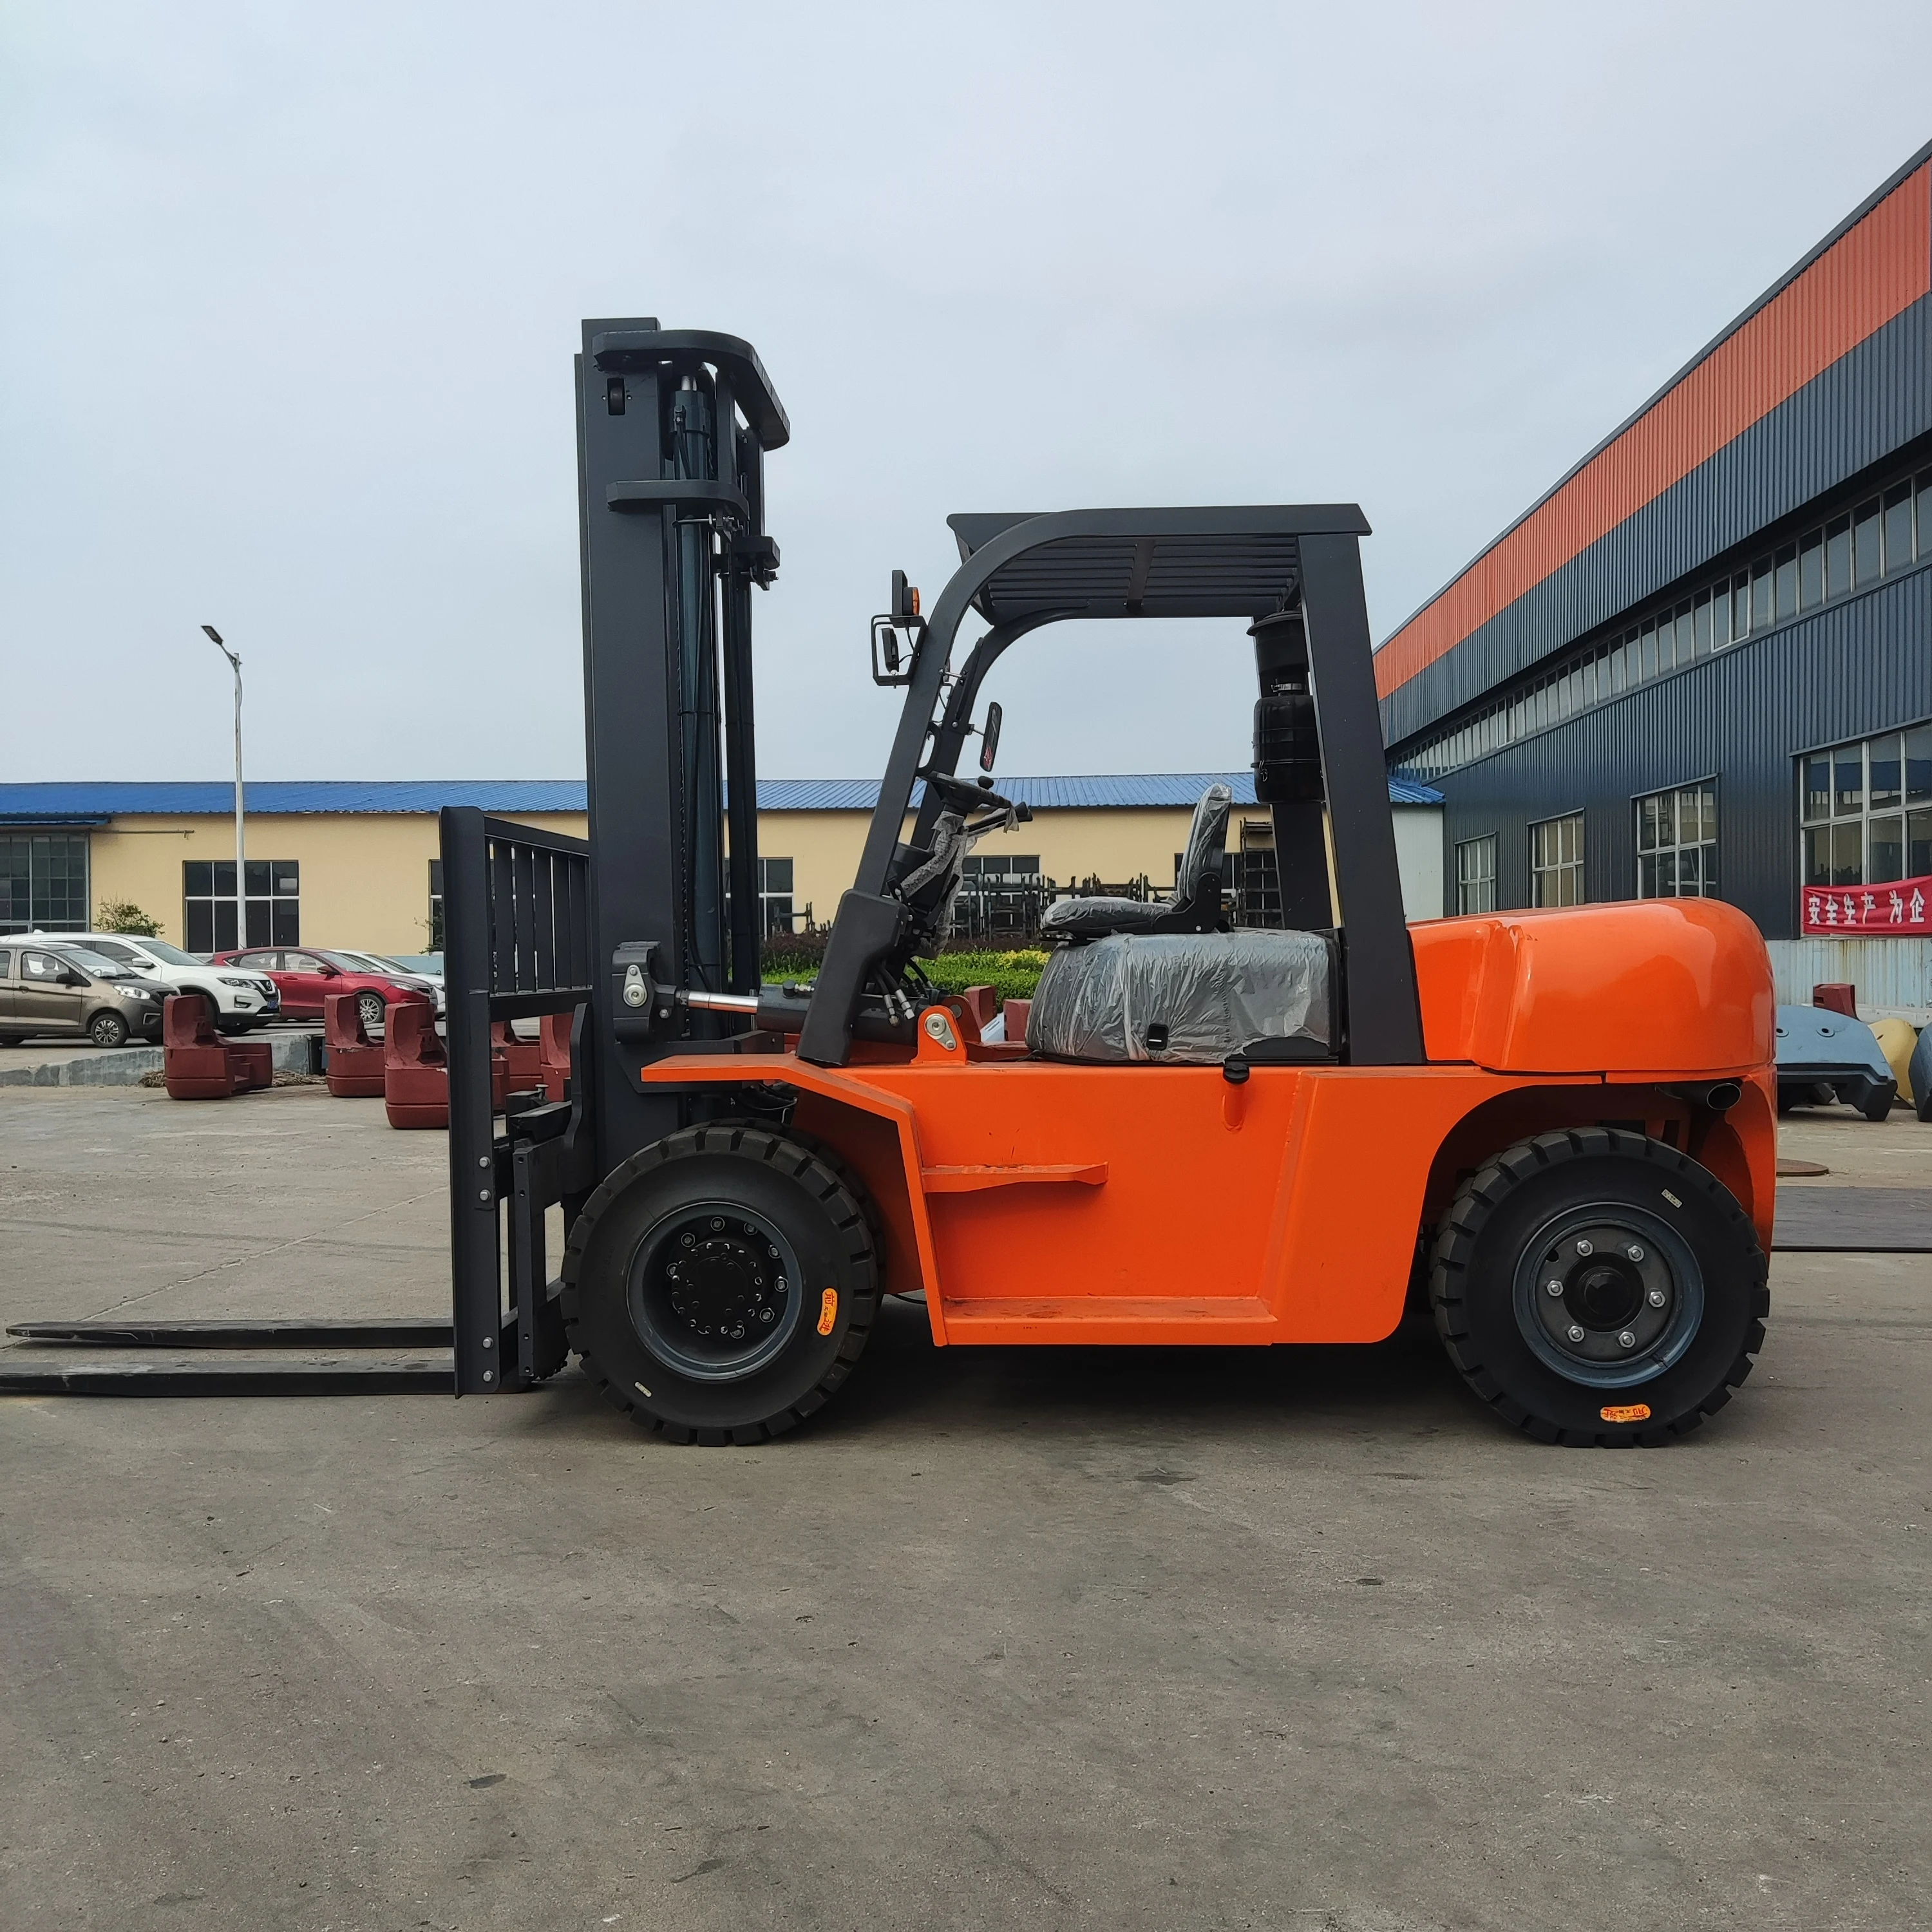 Multifunction Diesel Off Road Drum new forklift Truck Machines Forklift Max Power Engine Technical hand fork lifter